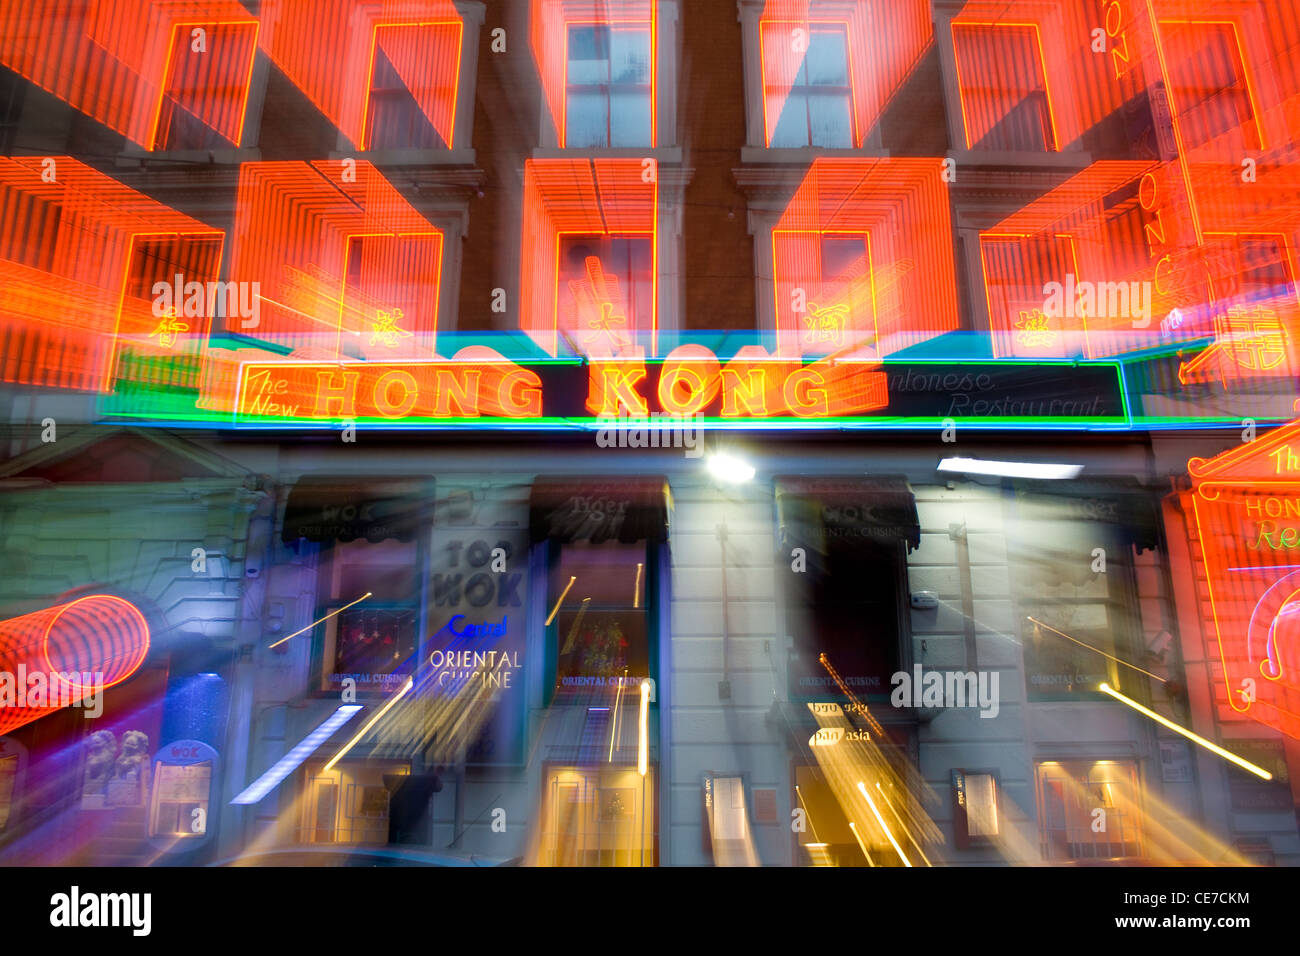 Hong Kong Restaurant photographed in China Town Manchester UK, using the in camera zoom burst effect. Stock Photo